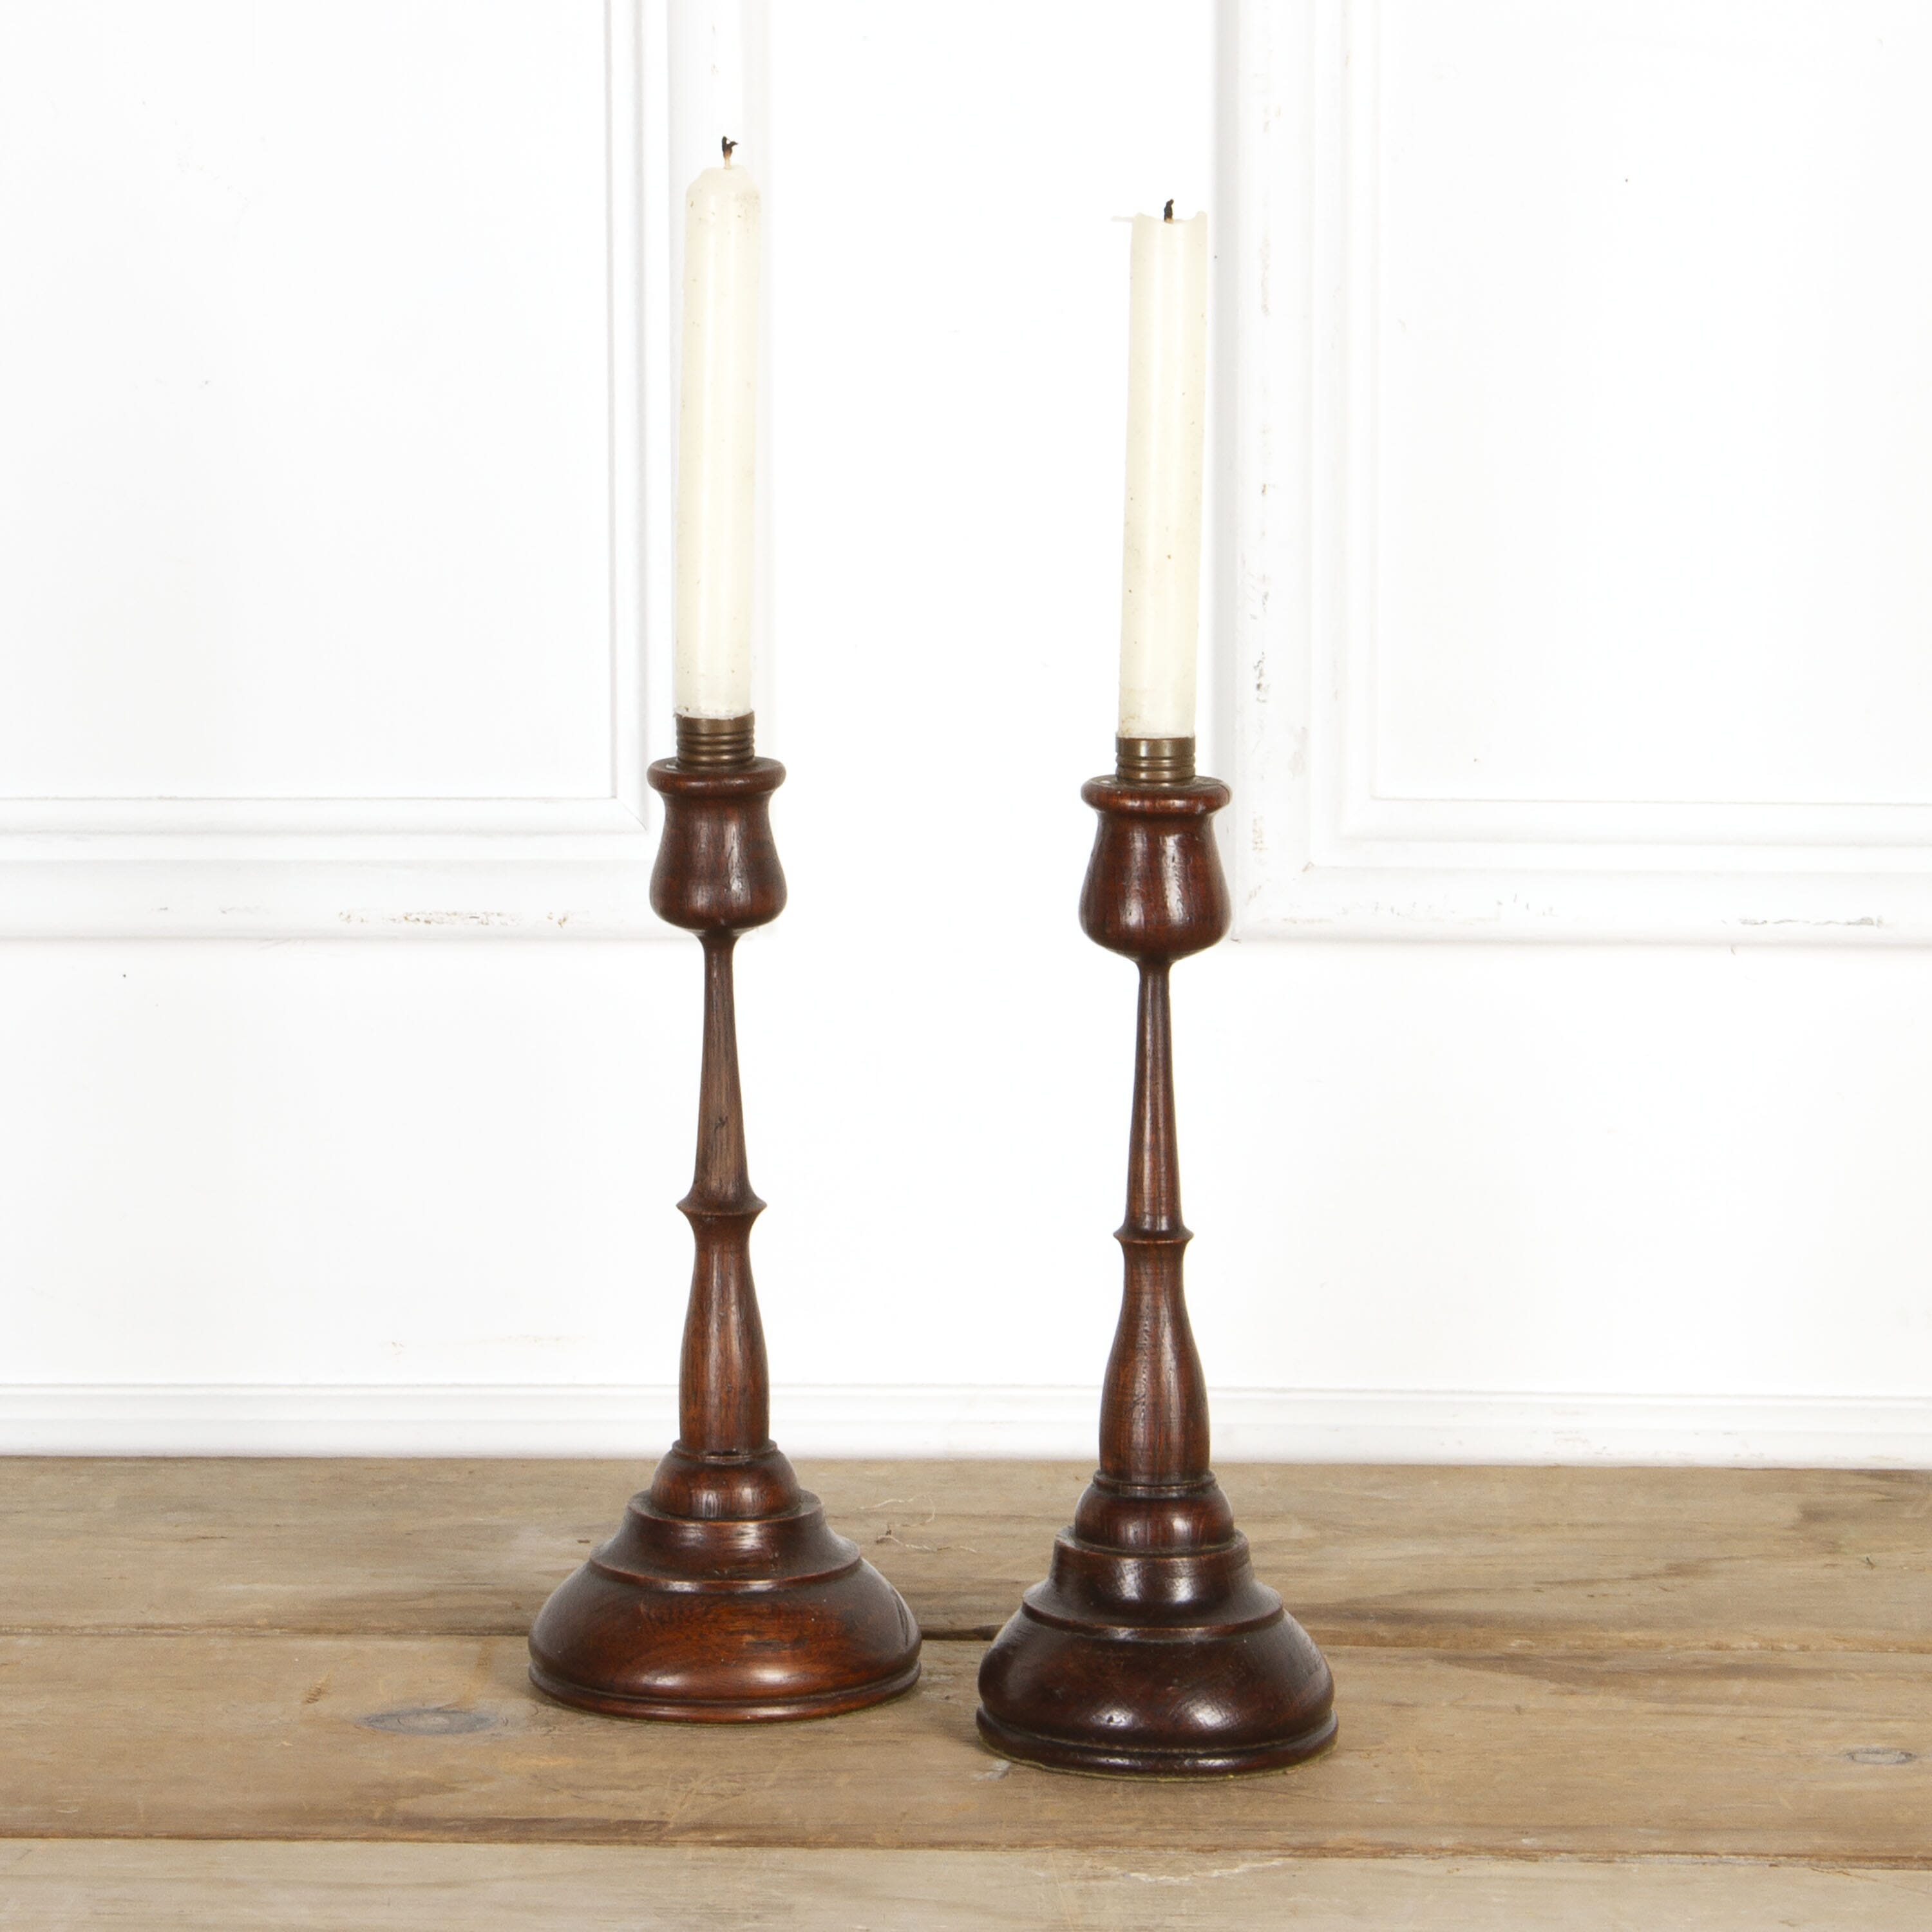 C1870 A Pair of Carved Wooden Candlesticks